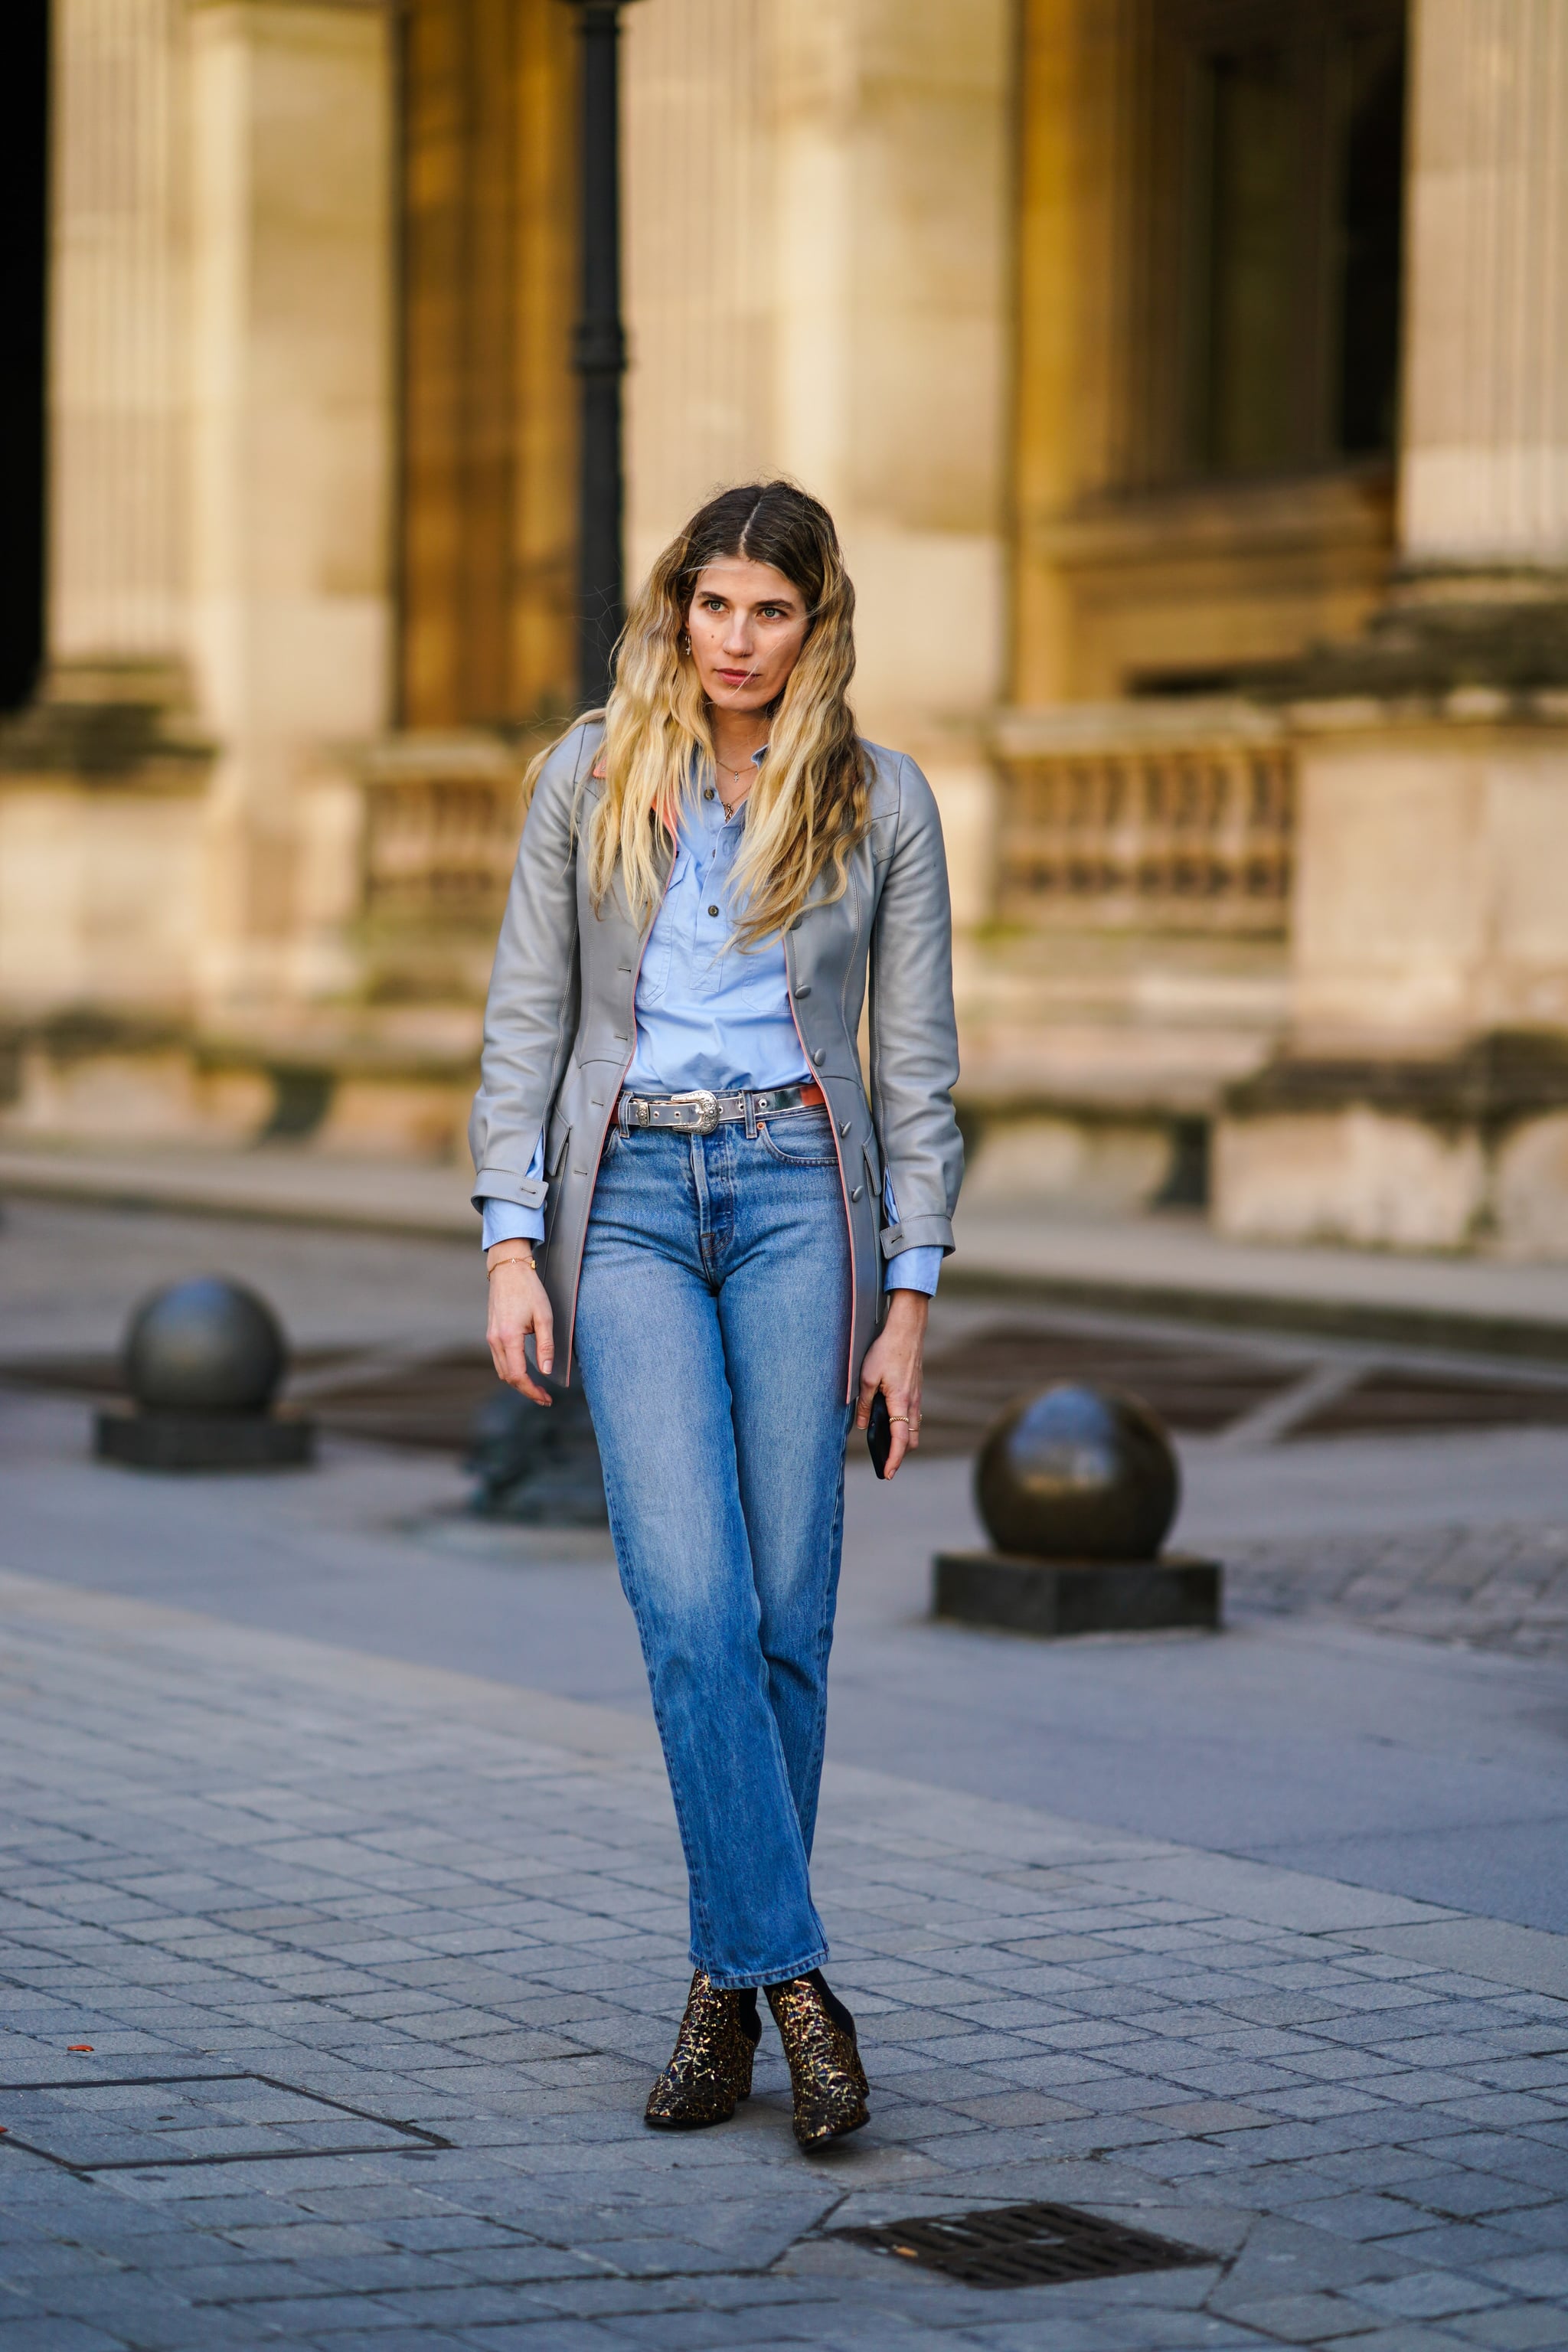 jeans and ankle boots outfits